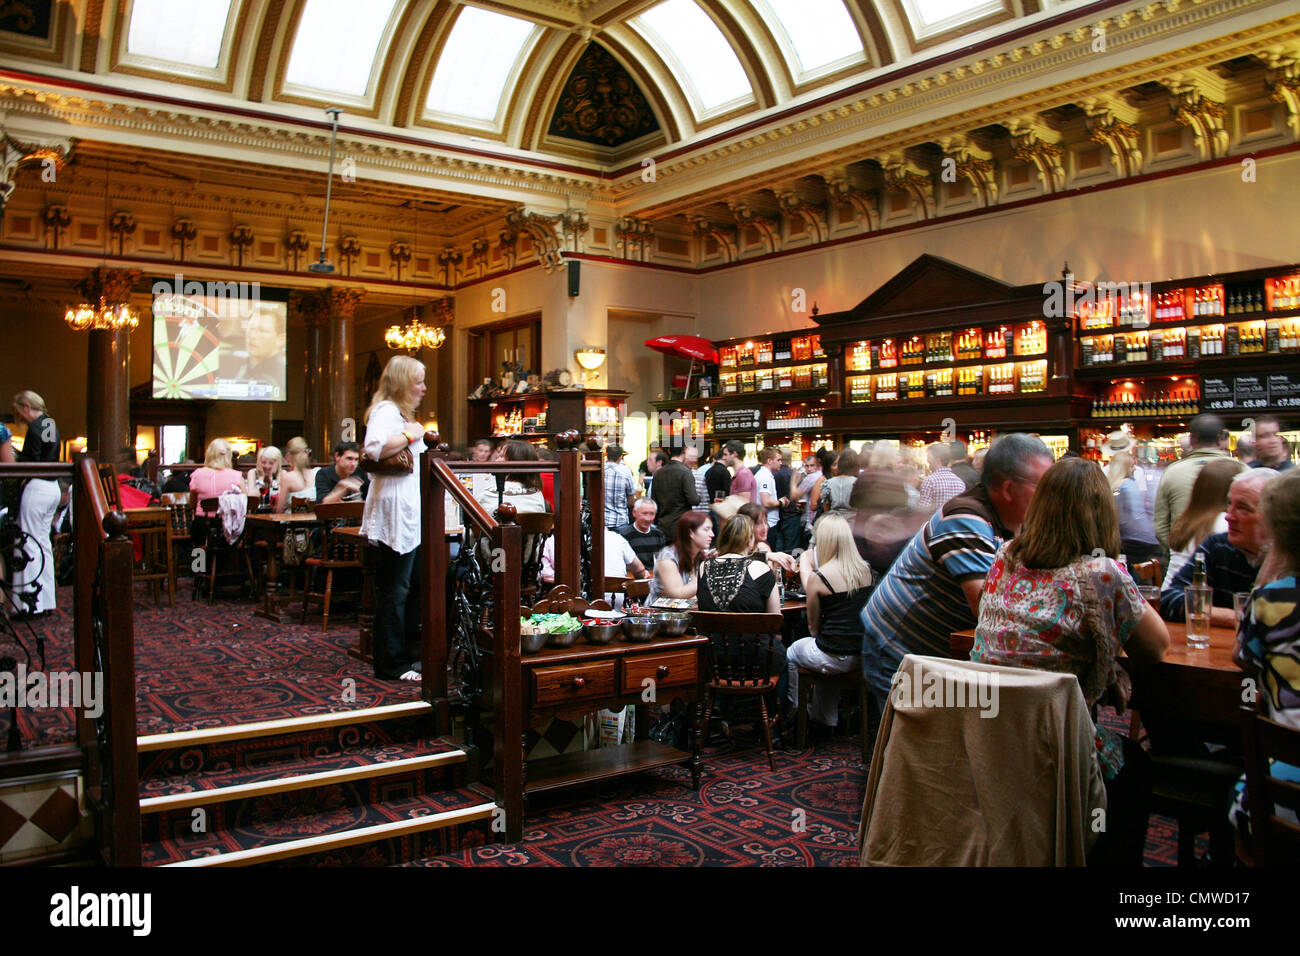 Edinburgh, UK - July 24, 2010: Inside view of a public house, known as pub, for drinking and socializing. Stock Photo